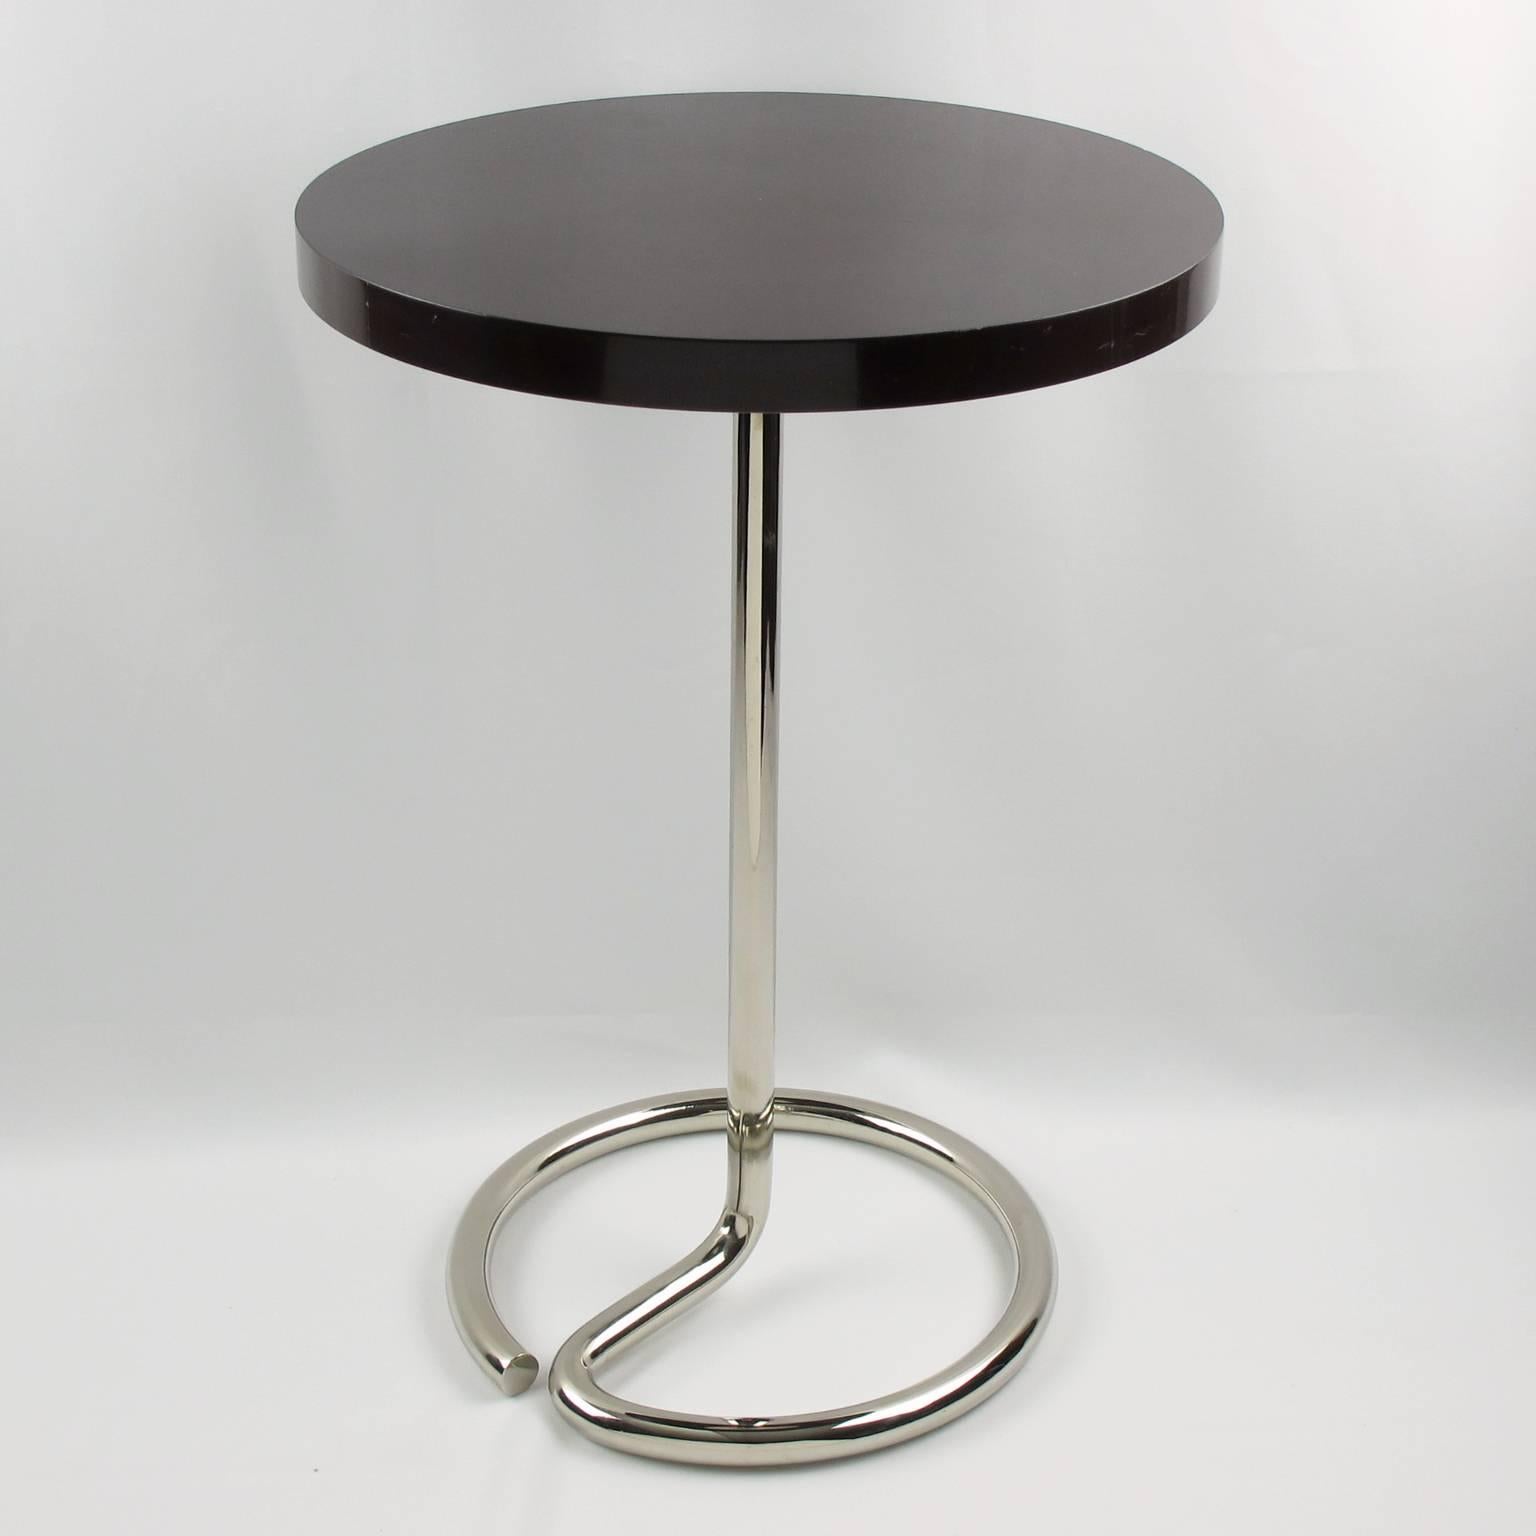 Rare French Art Deco occasional coffee or side table designed by René Herbst, circa 1935s. Minimalist design with original chromed metal snake shape base with black-brown Bakelite round table top. Manufacturers stamps under metal base and under